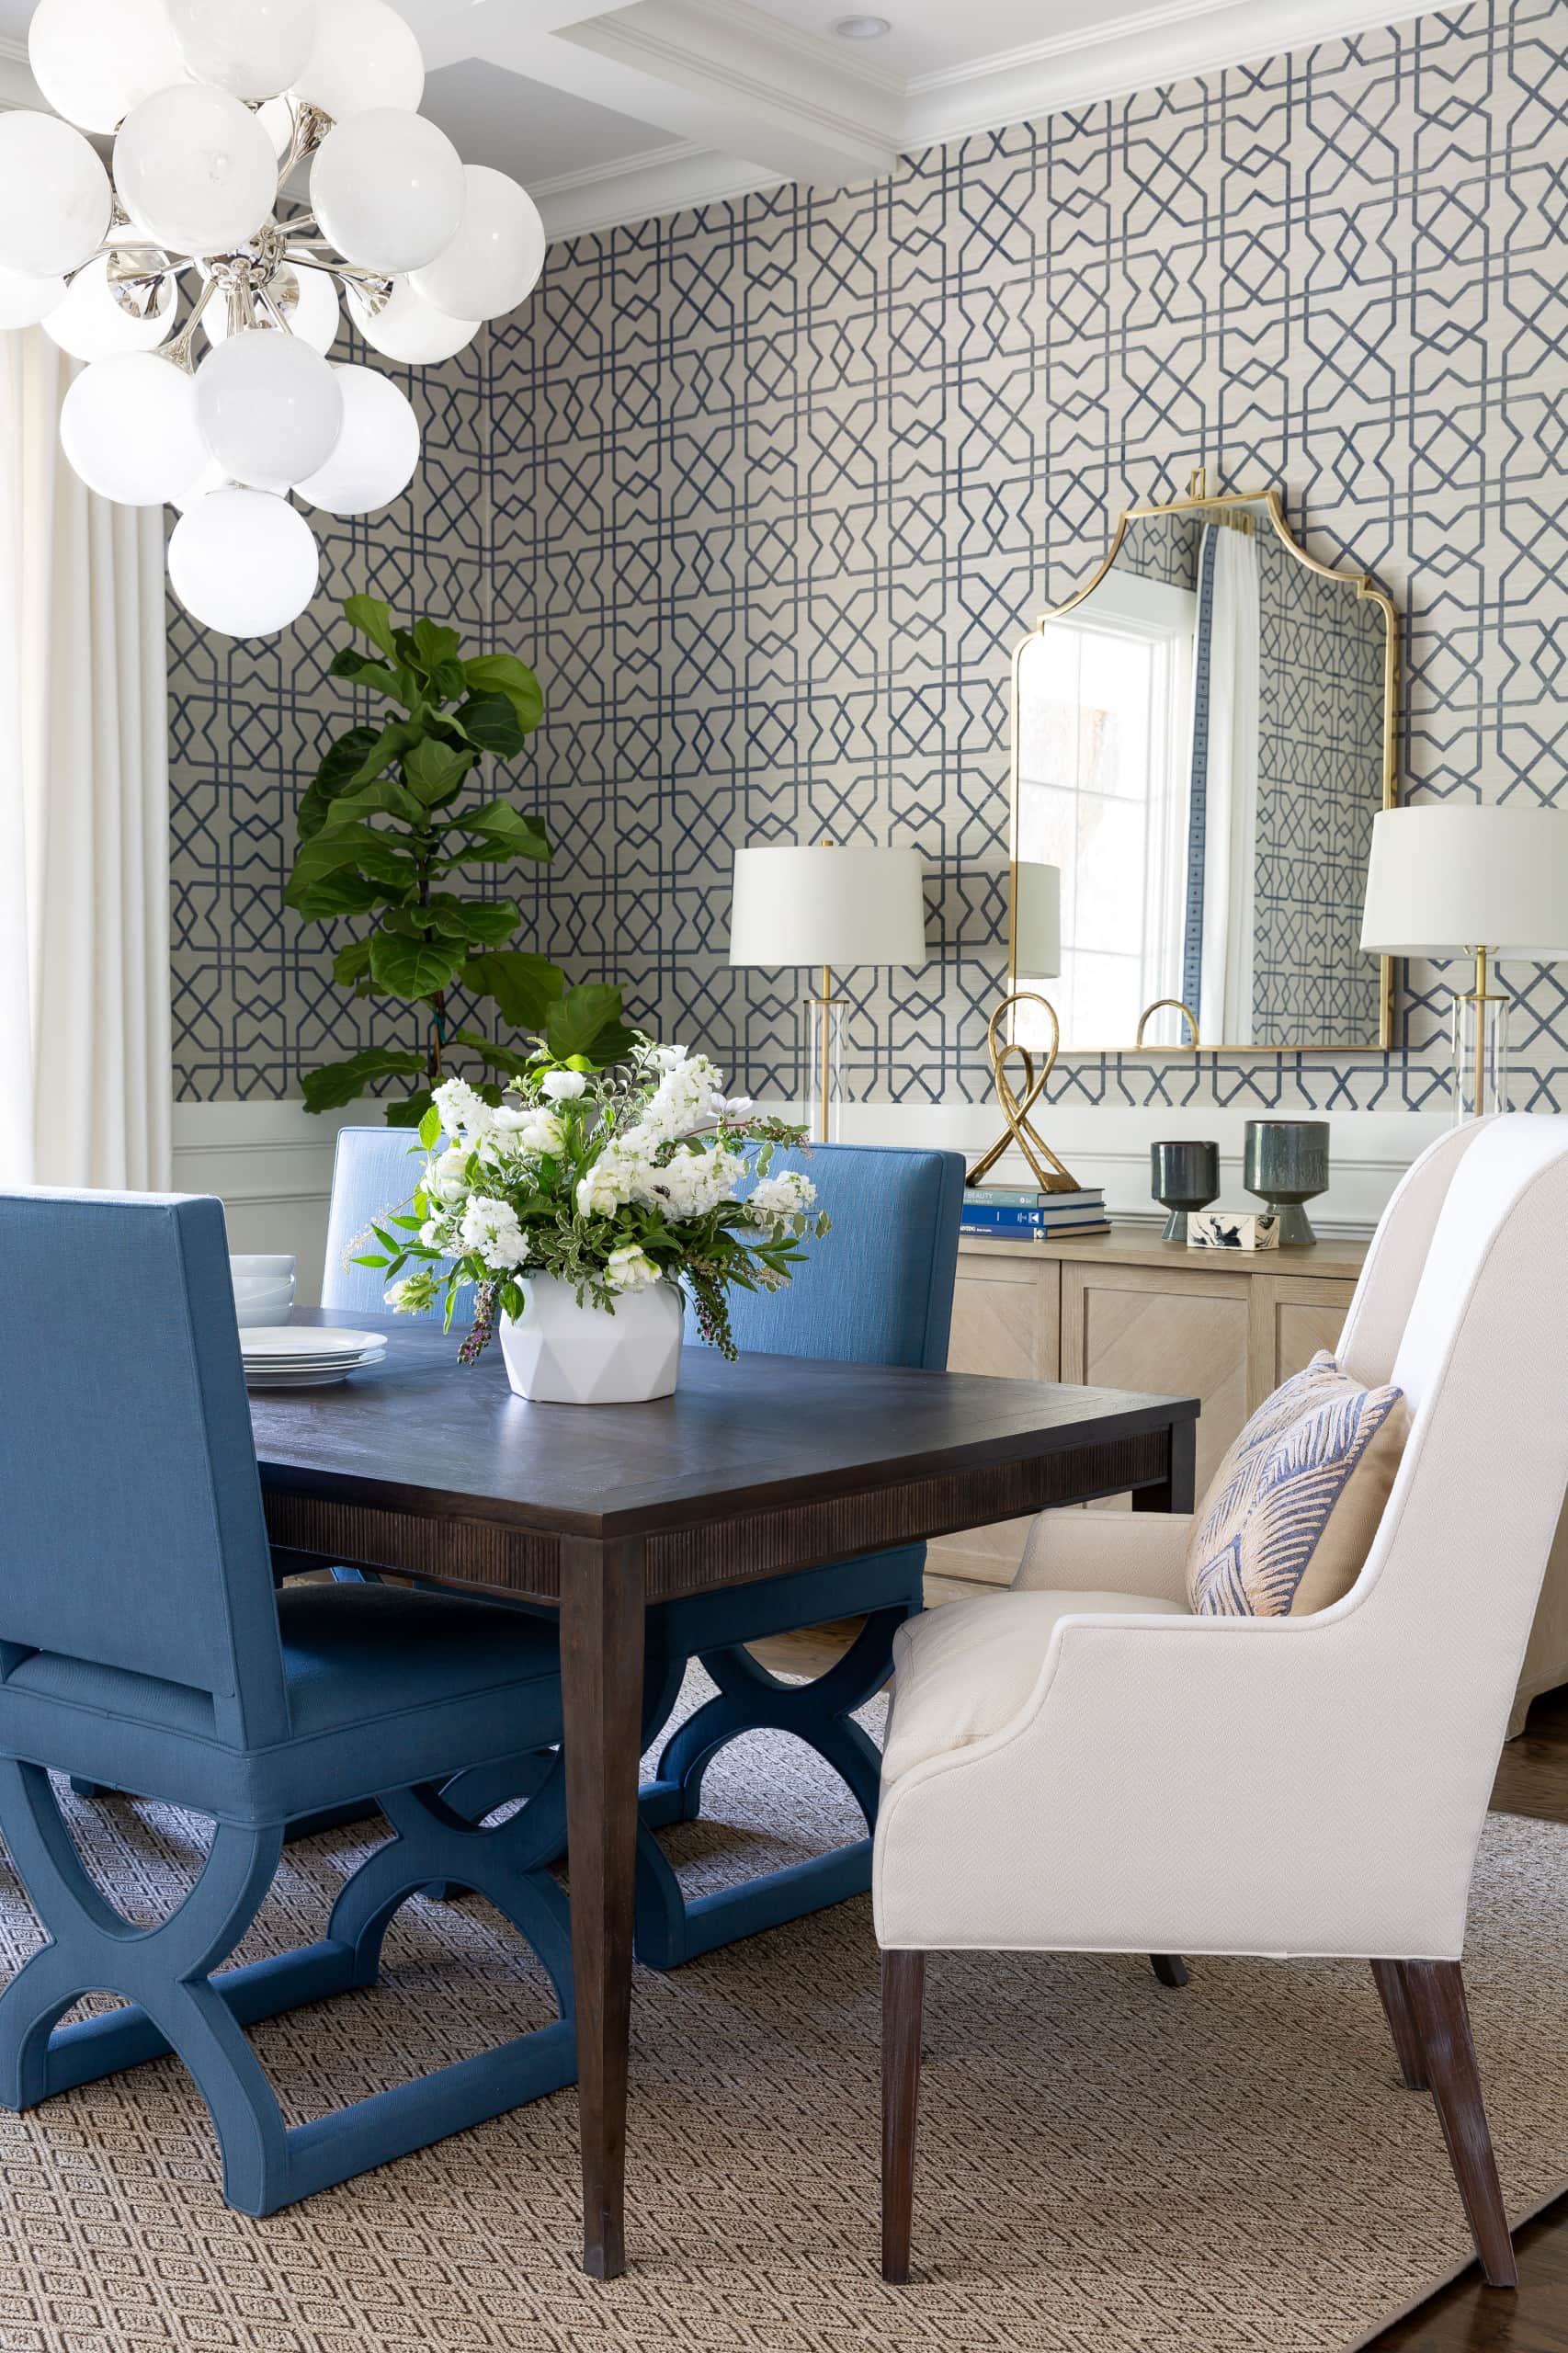 Dining room with a coastal style, featuring blue dining chairs and large dark wooden table. Home tour ideas.